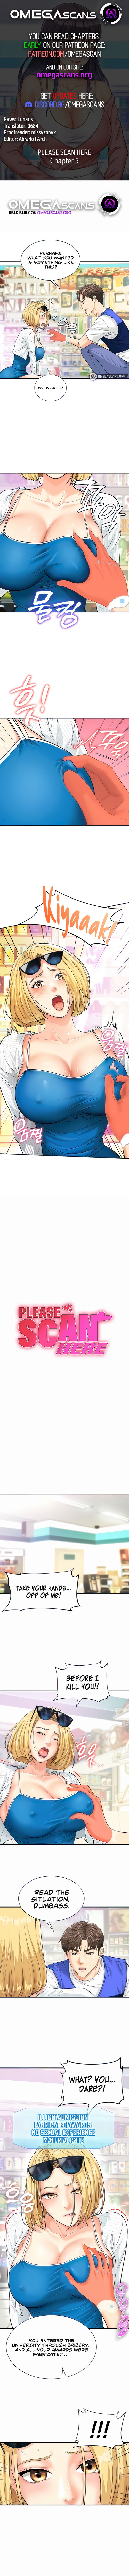 please-scan-here-chap-5-0